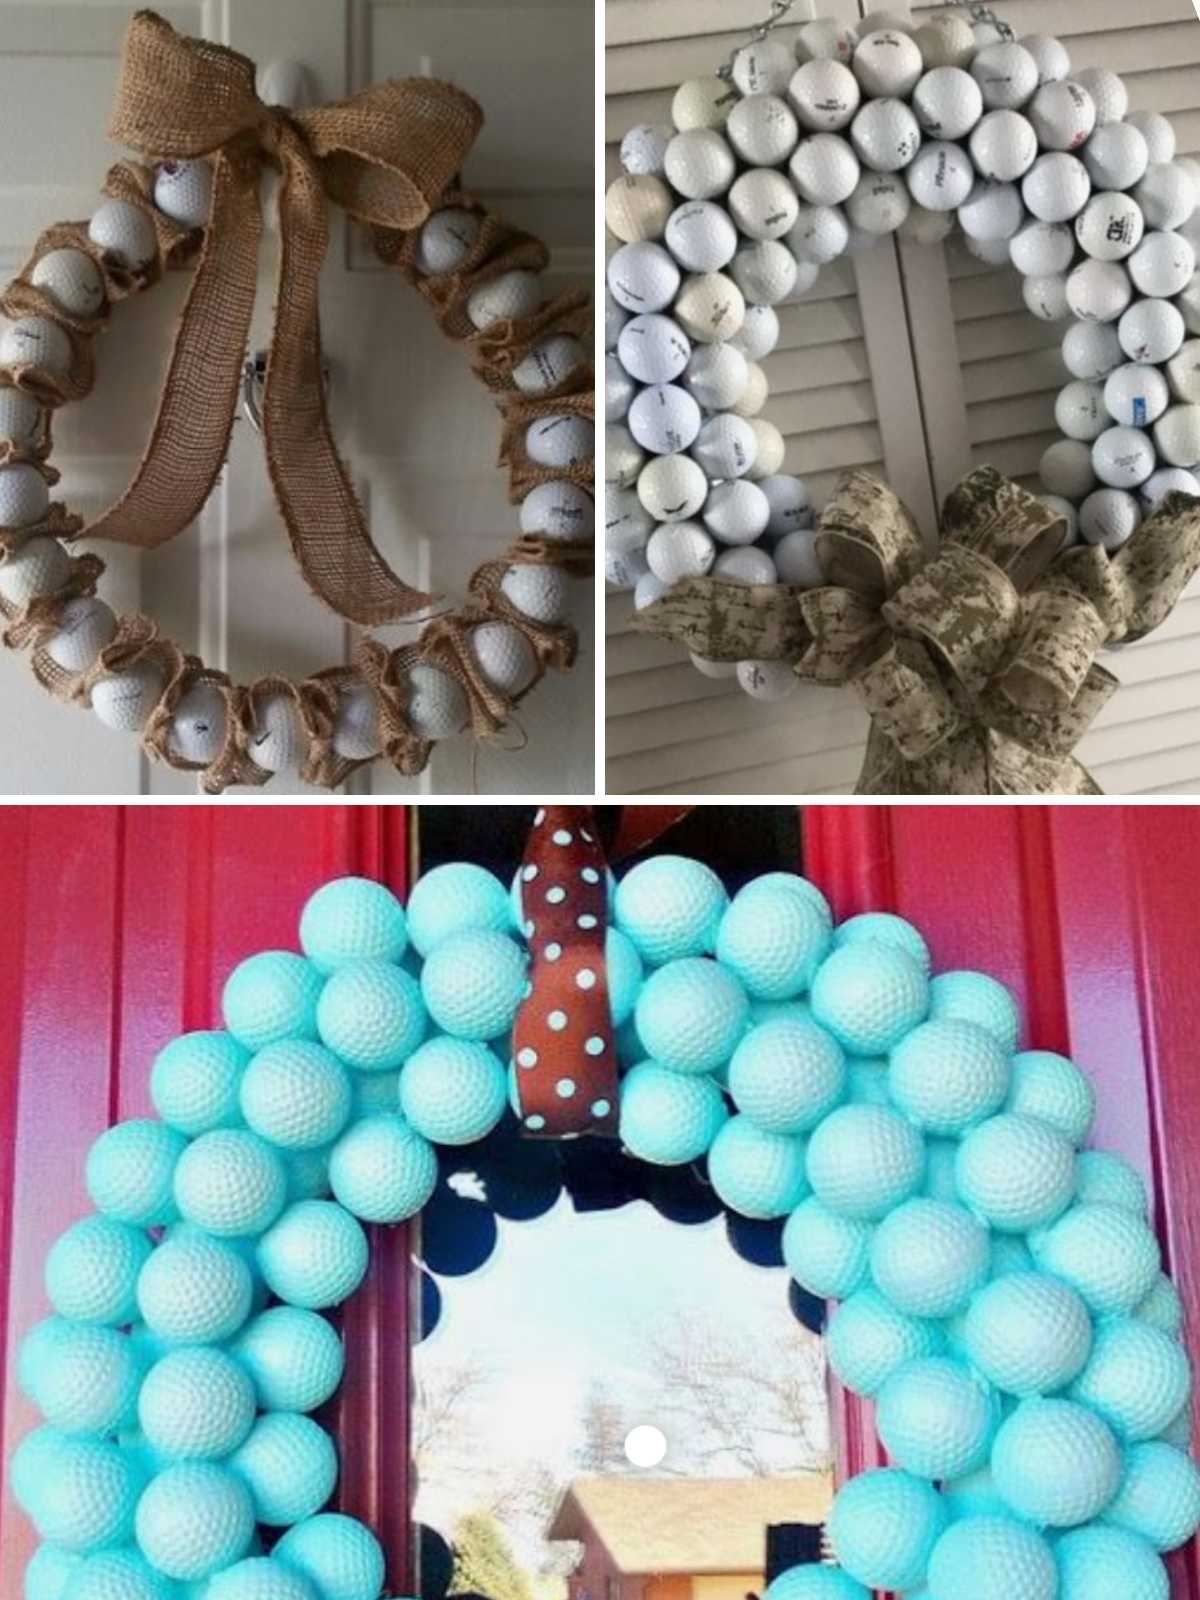 How to make a wreath with golf balls